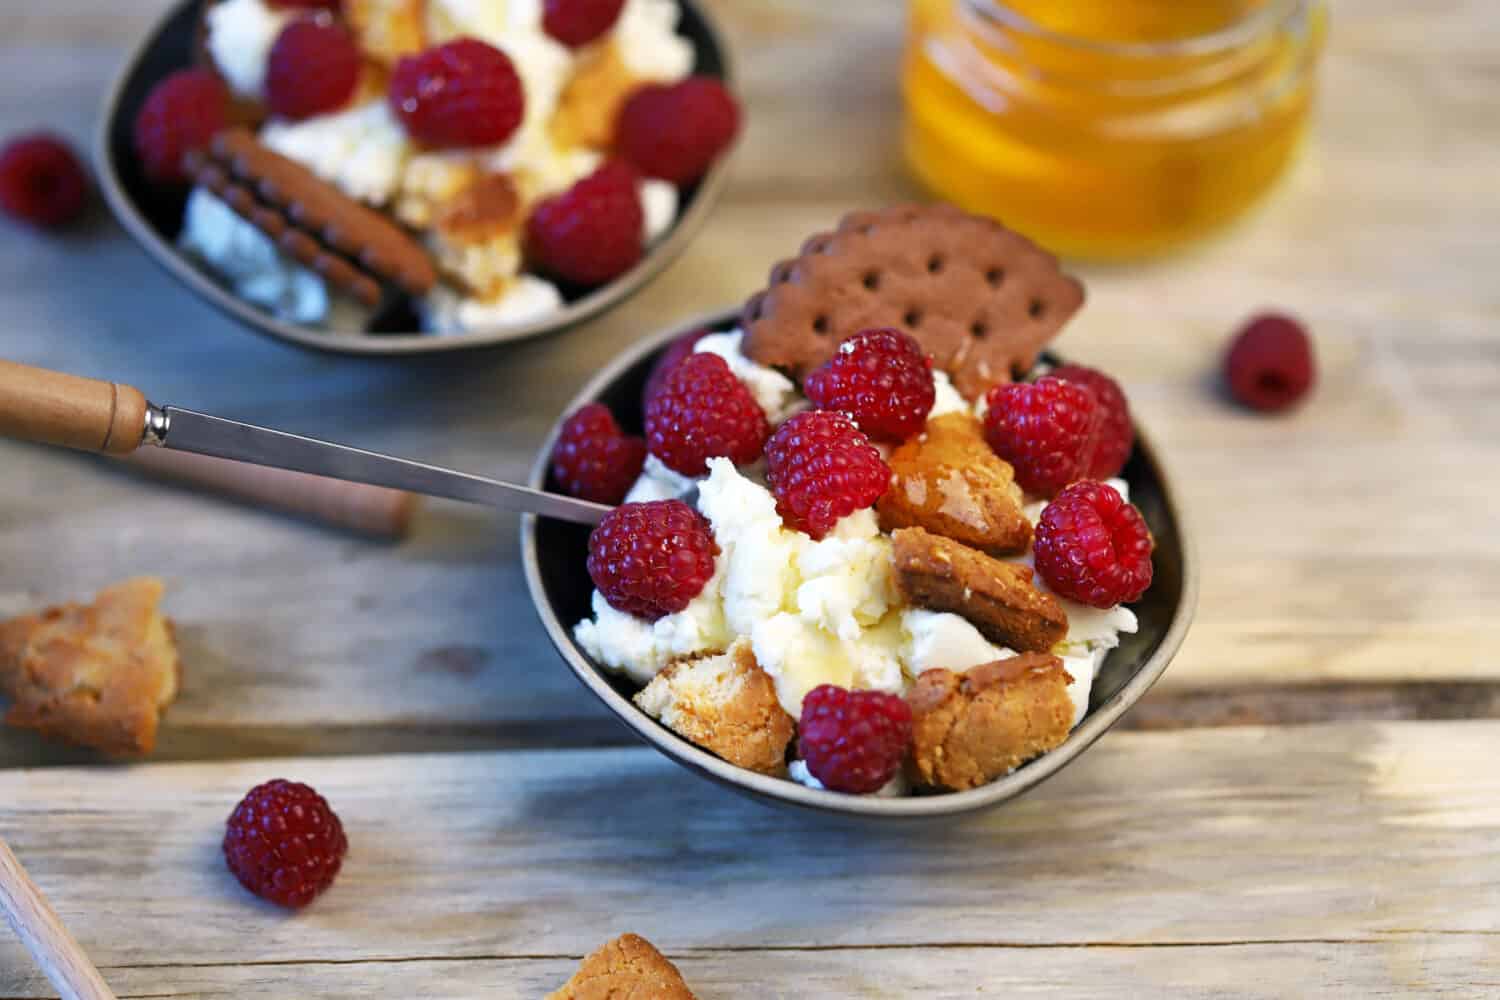 Selective focus. Delicious dessert with mascarpone cheese, raspberries and cookies.